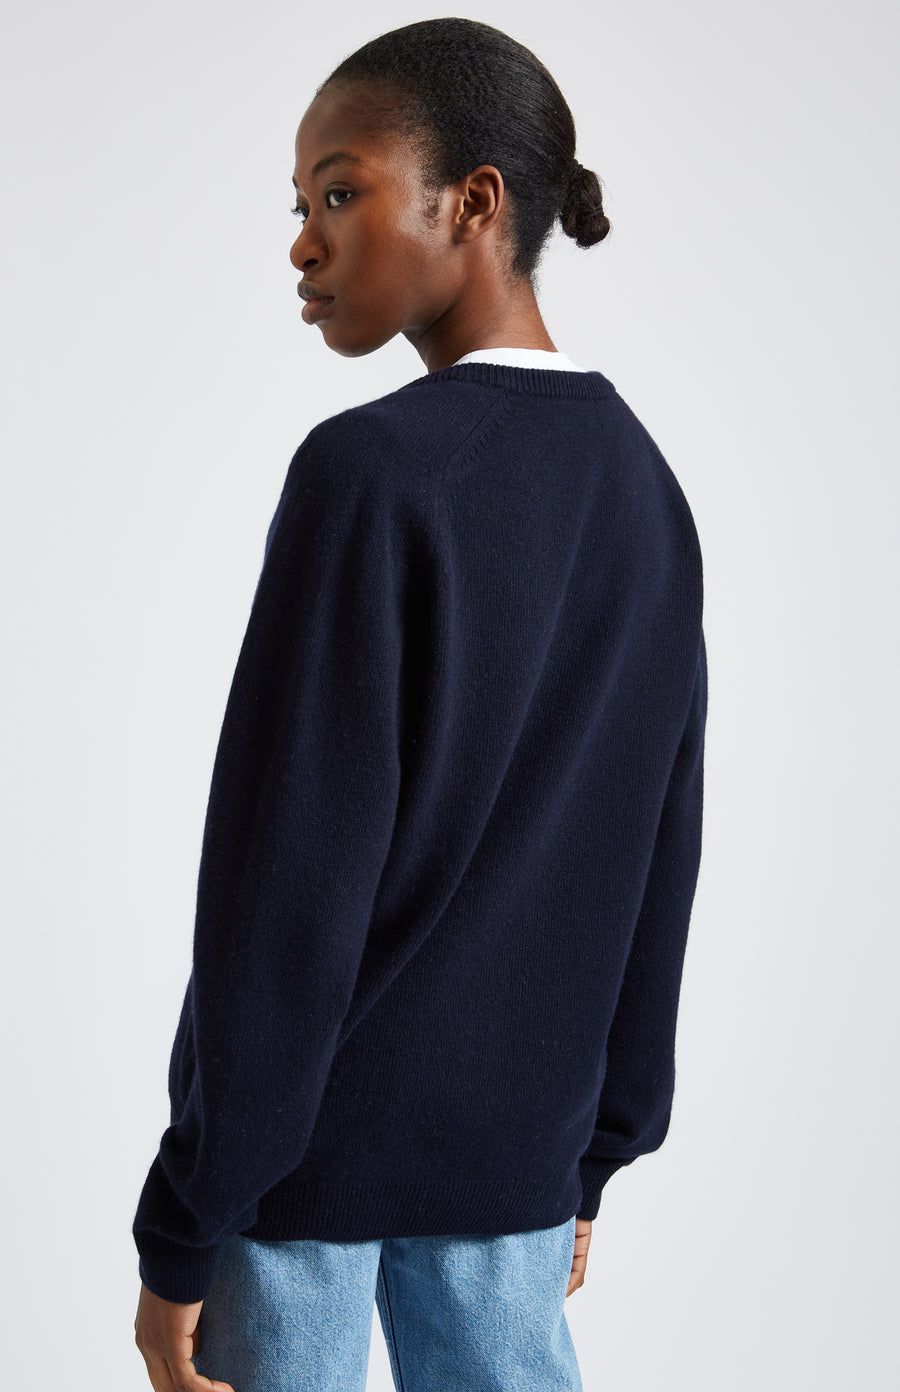 Archive Lambswool Jumper In Navy with Ivory embroidery on female model back - Pringle of Scotland